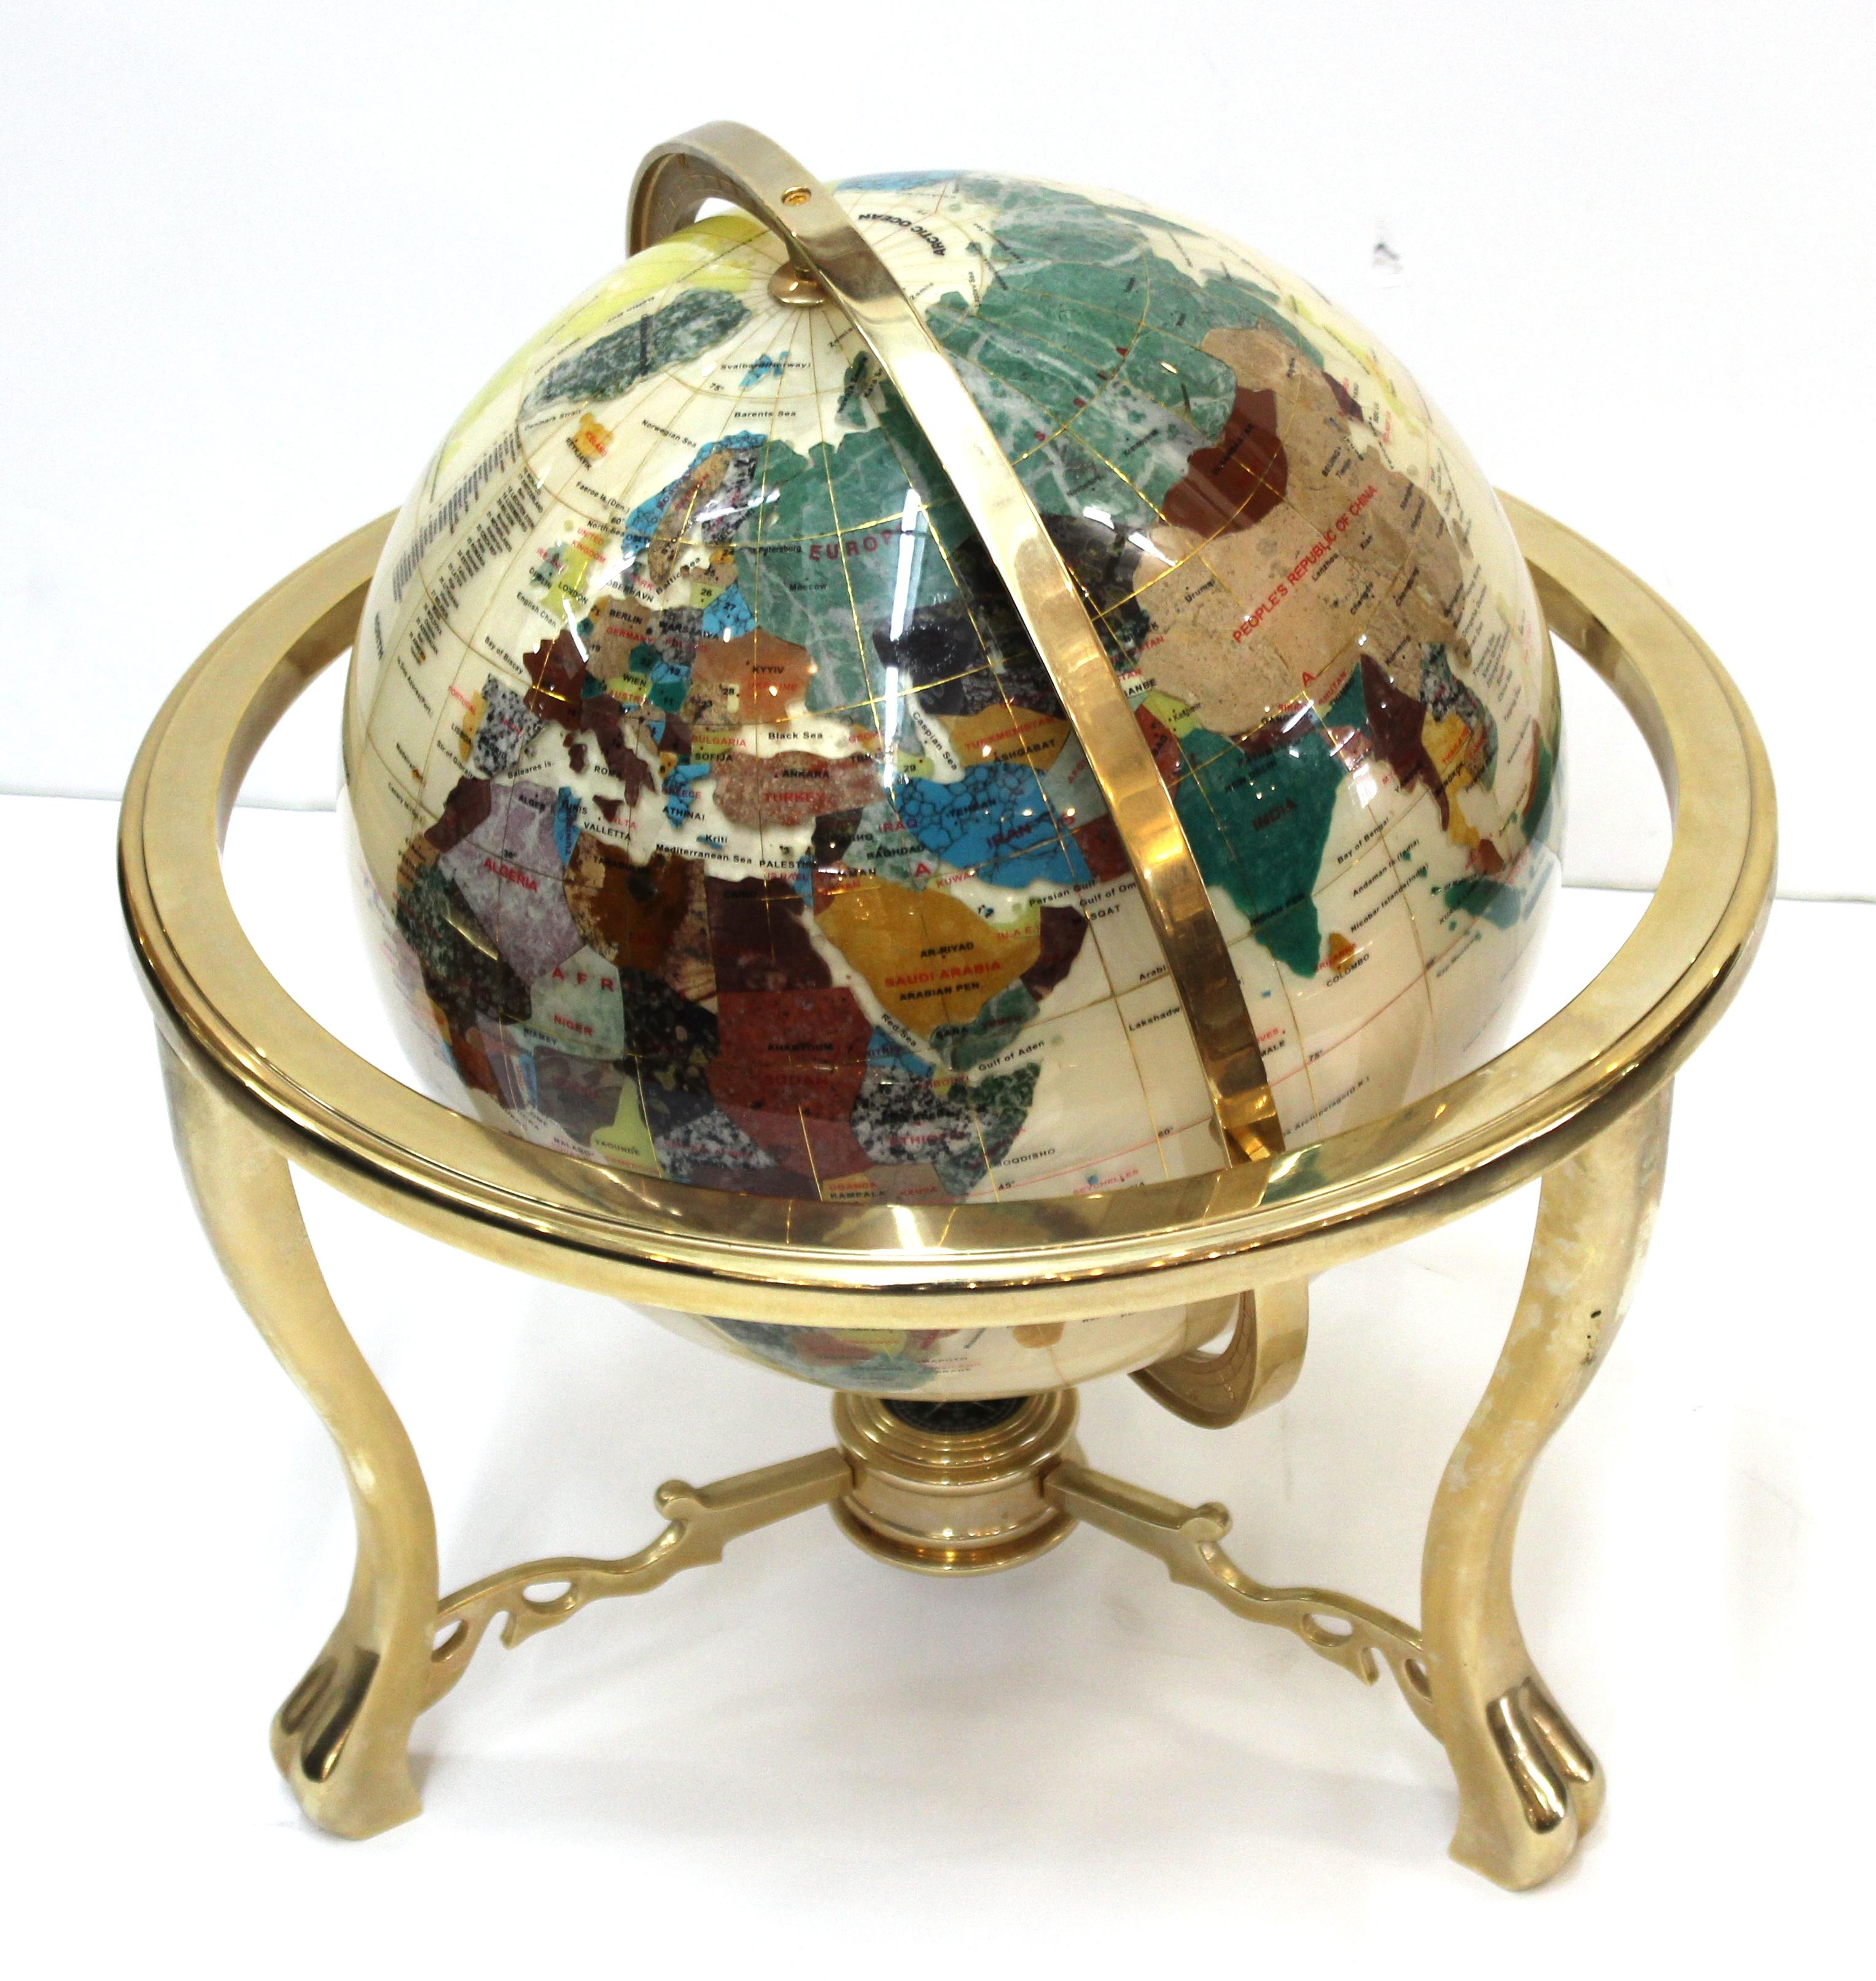 Modern world globe in semi-precious stone on heavy brass stand. The globe is made of lapis-lazuli, geodes and mother-of-pearl on top of brass fittings. Made during the 1980s in the United States. In great vintage condition with age-appropriate wear.